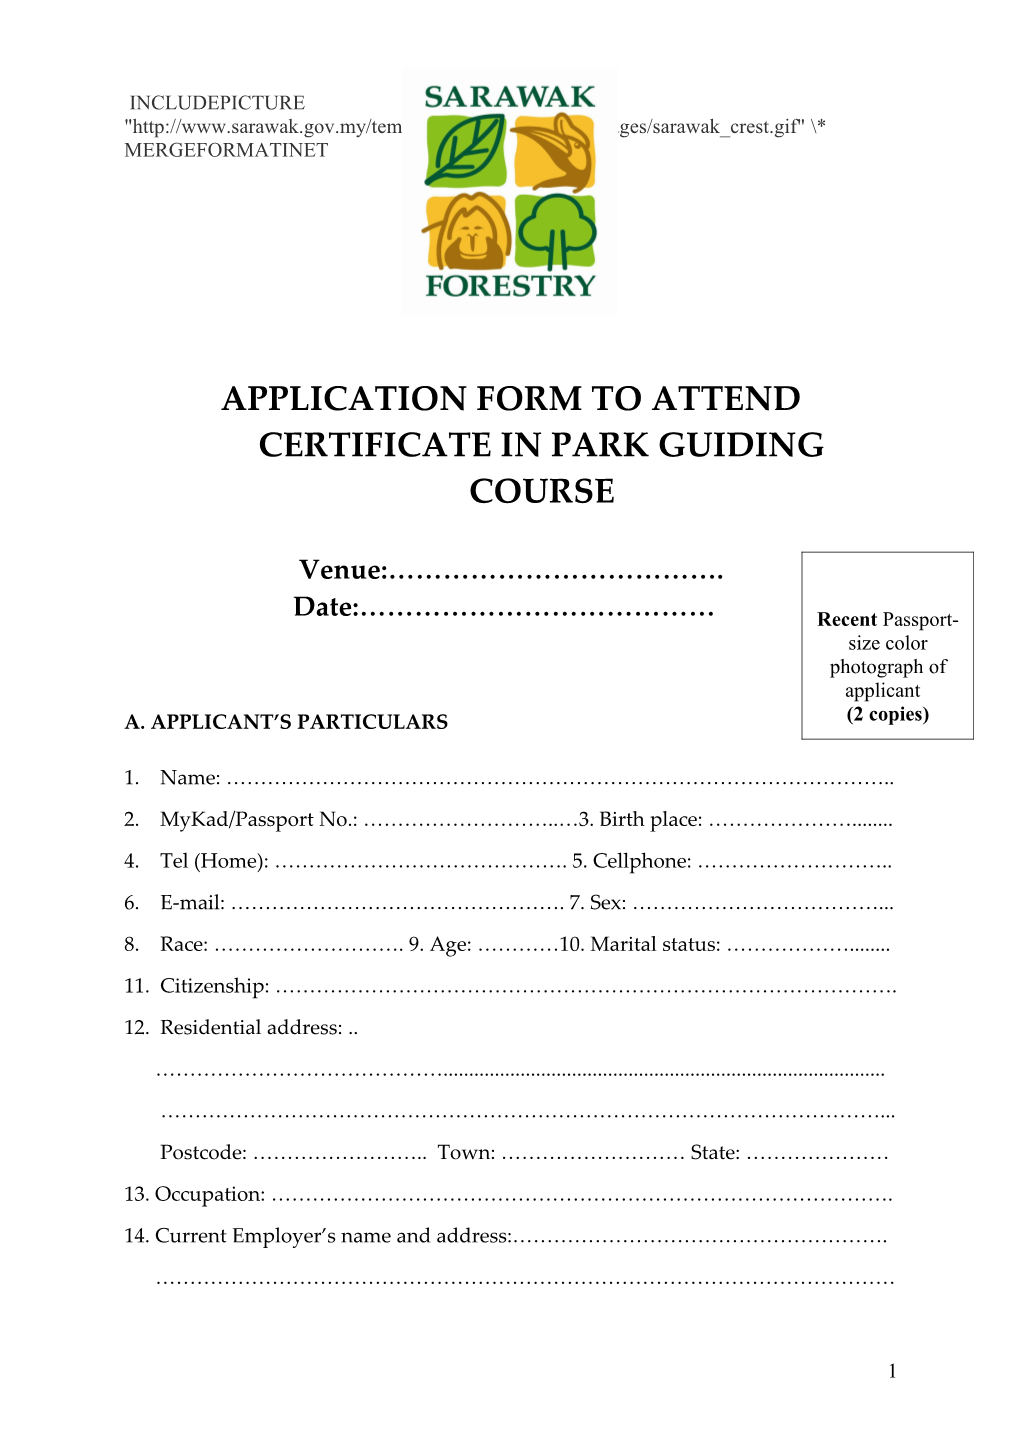 Application Form to Attend Certificate in Park Guiding Course